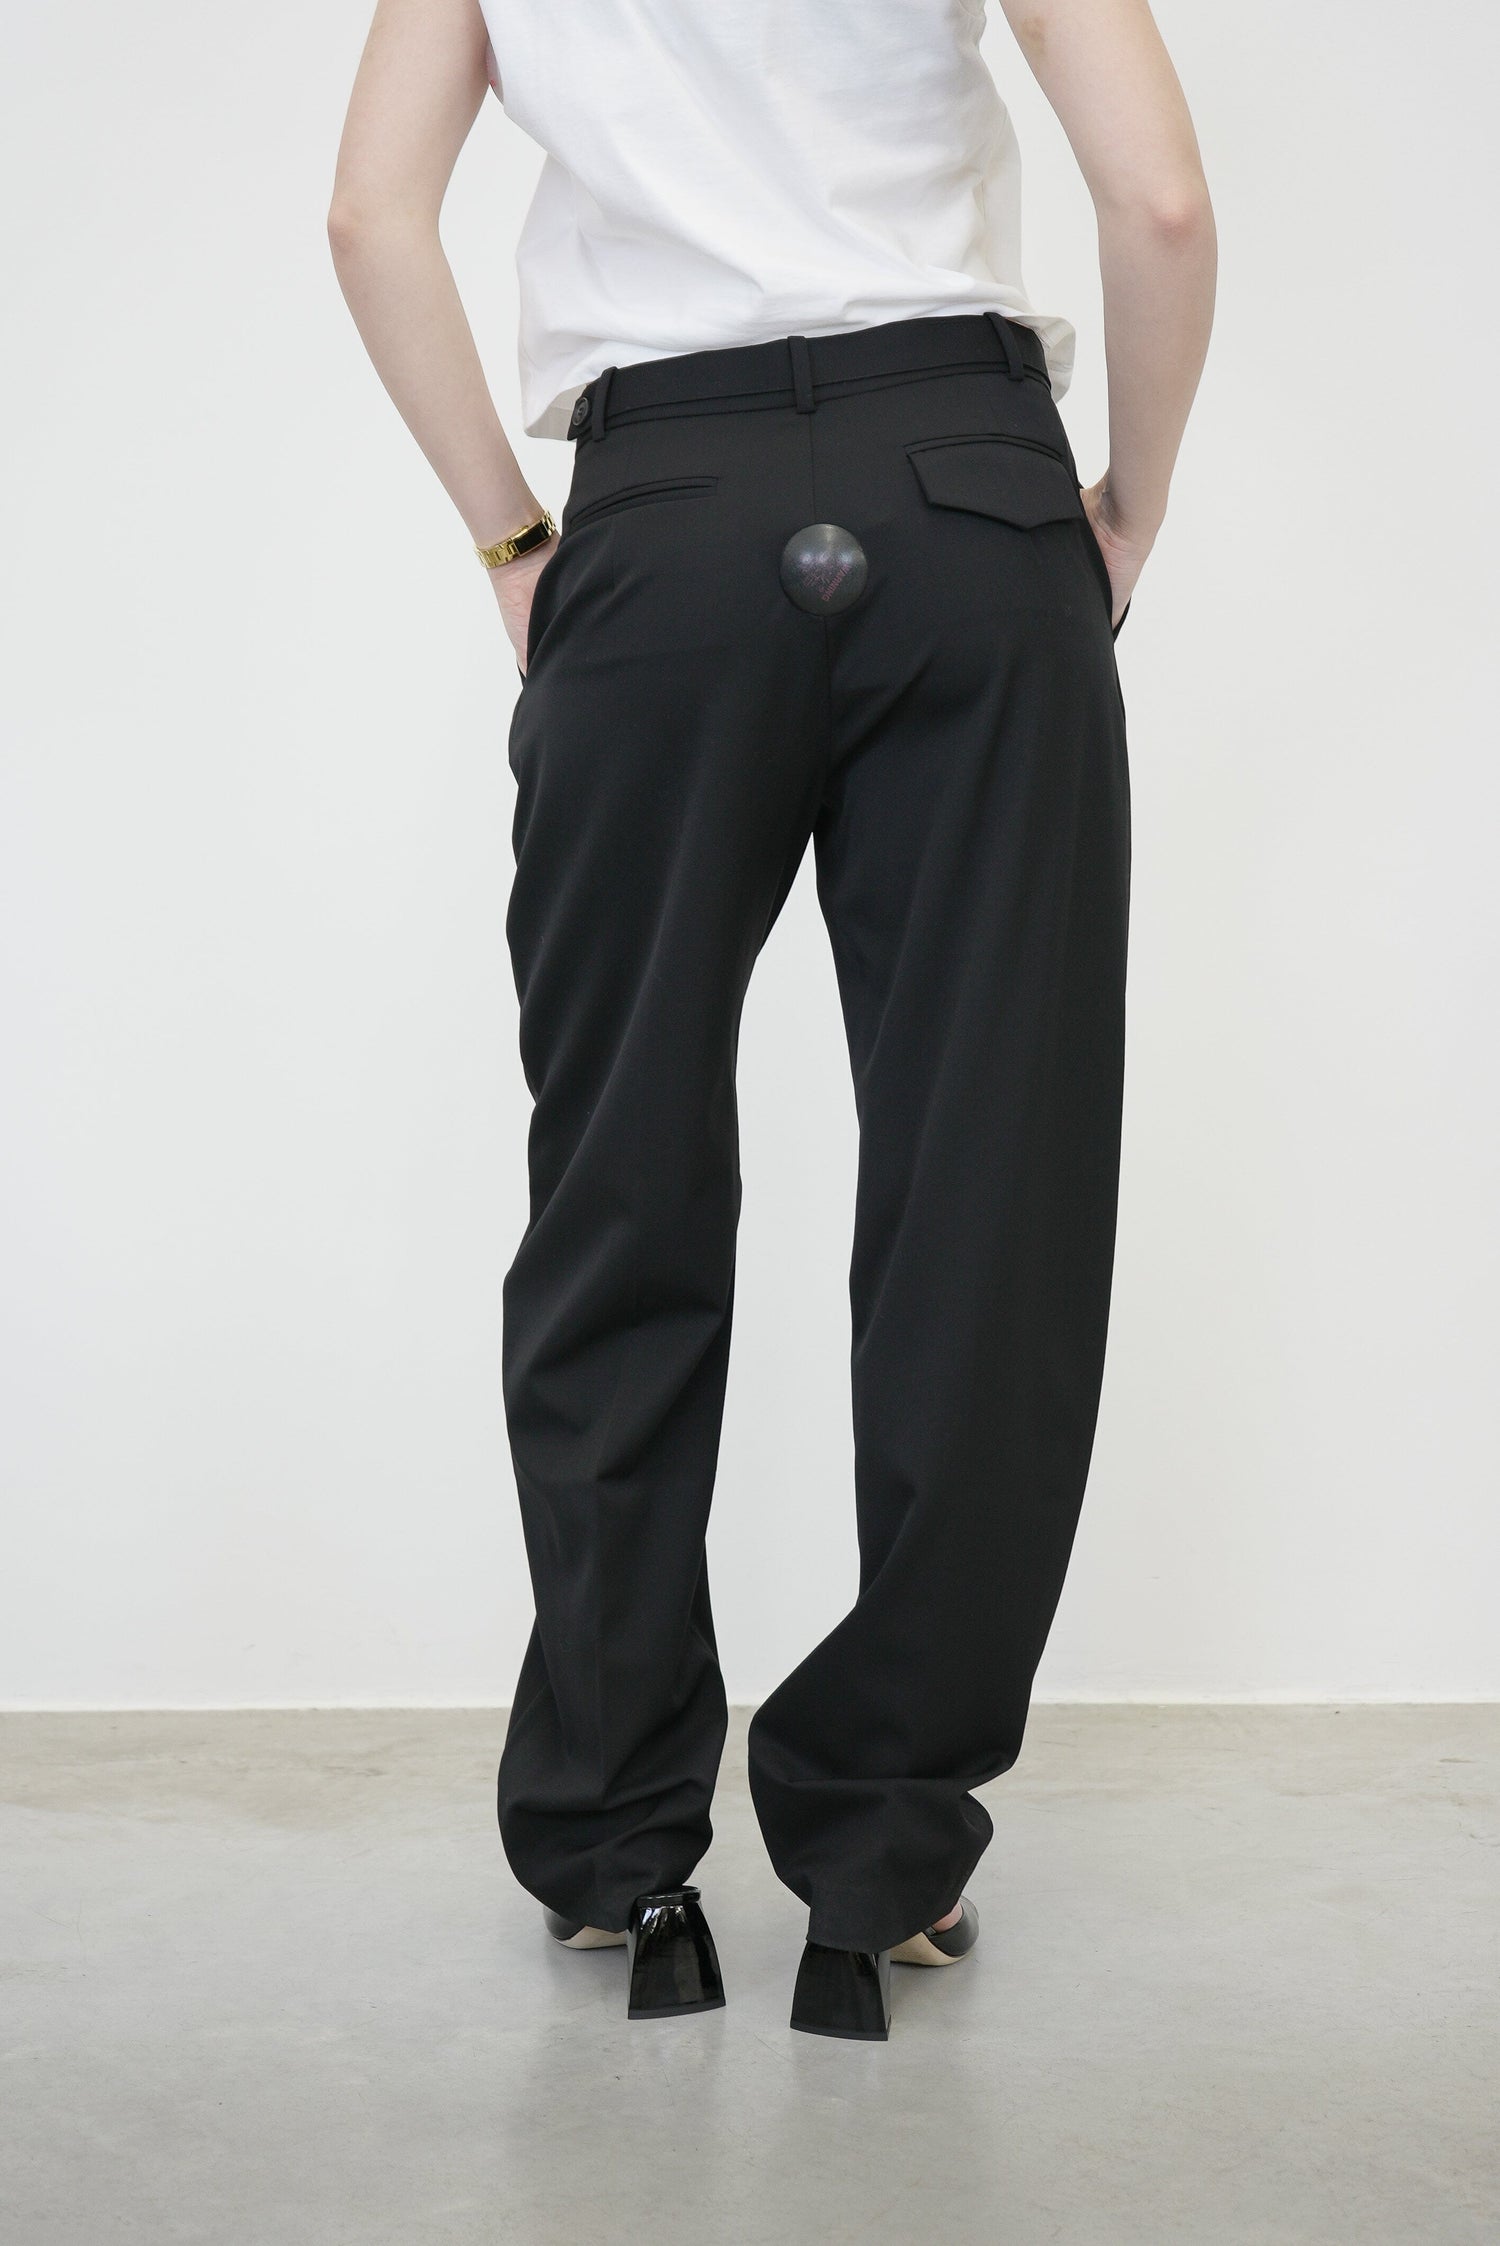 RELAXED FIT BELTED PANTS PANTS ST AGNI 